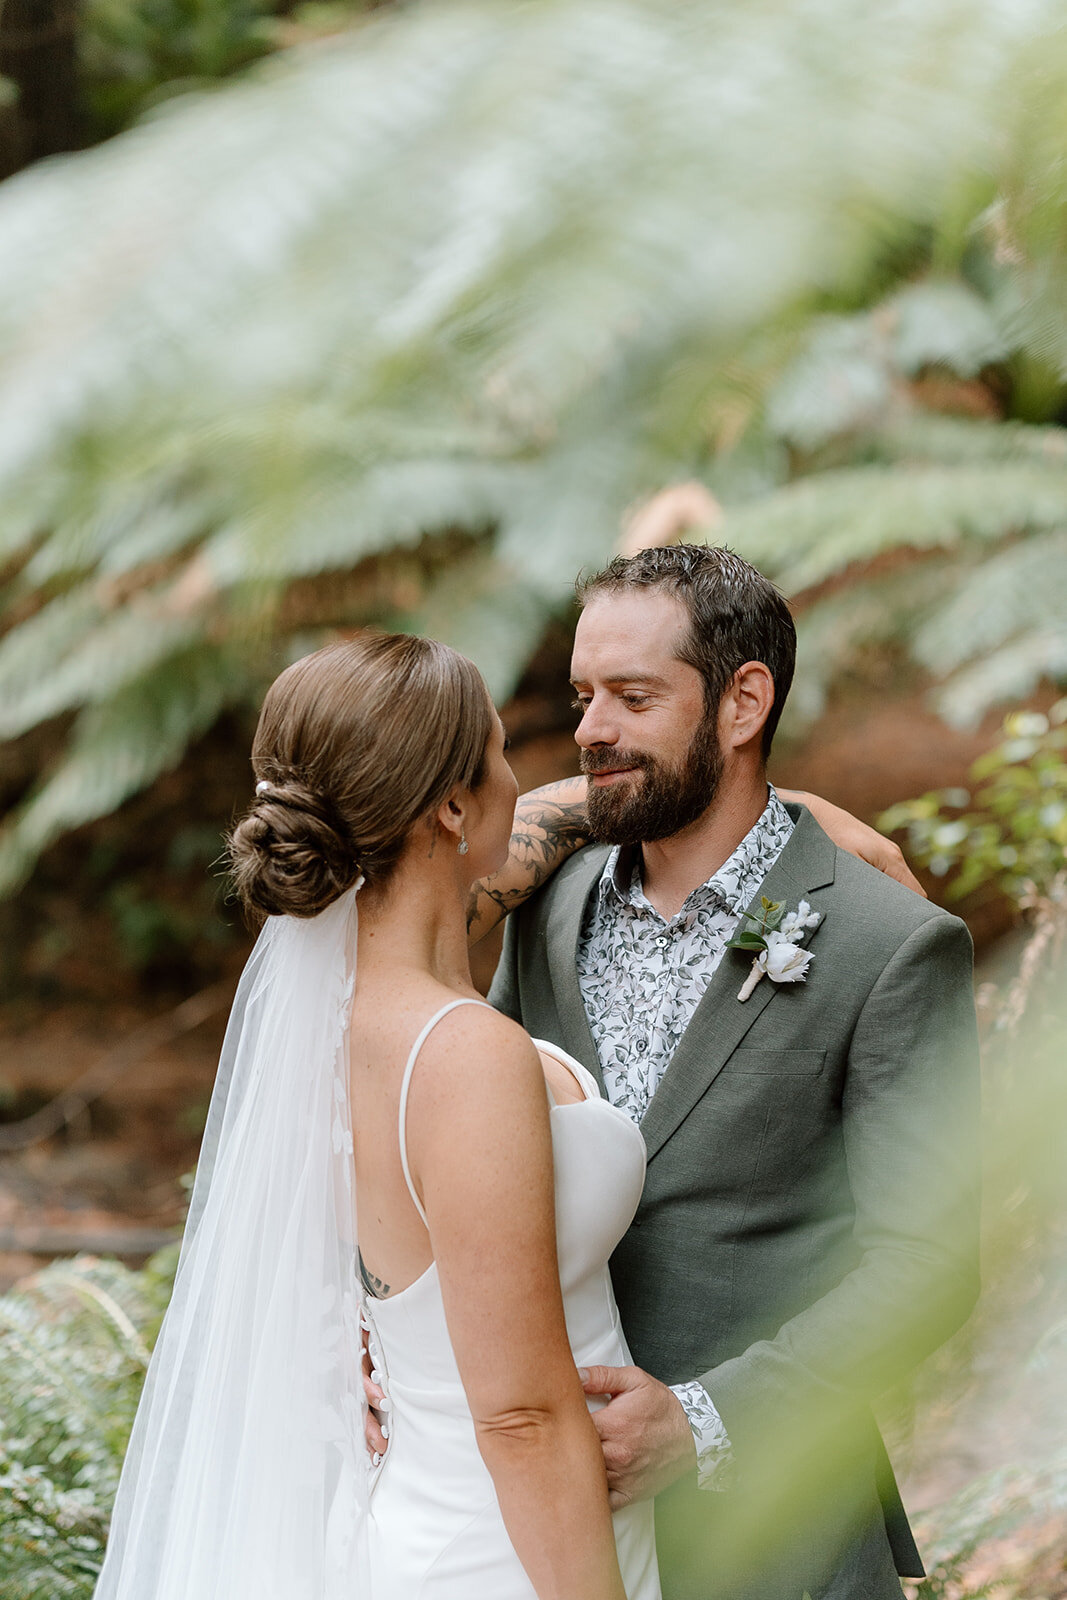 Stacey&Cory-Coast&Pines-341